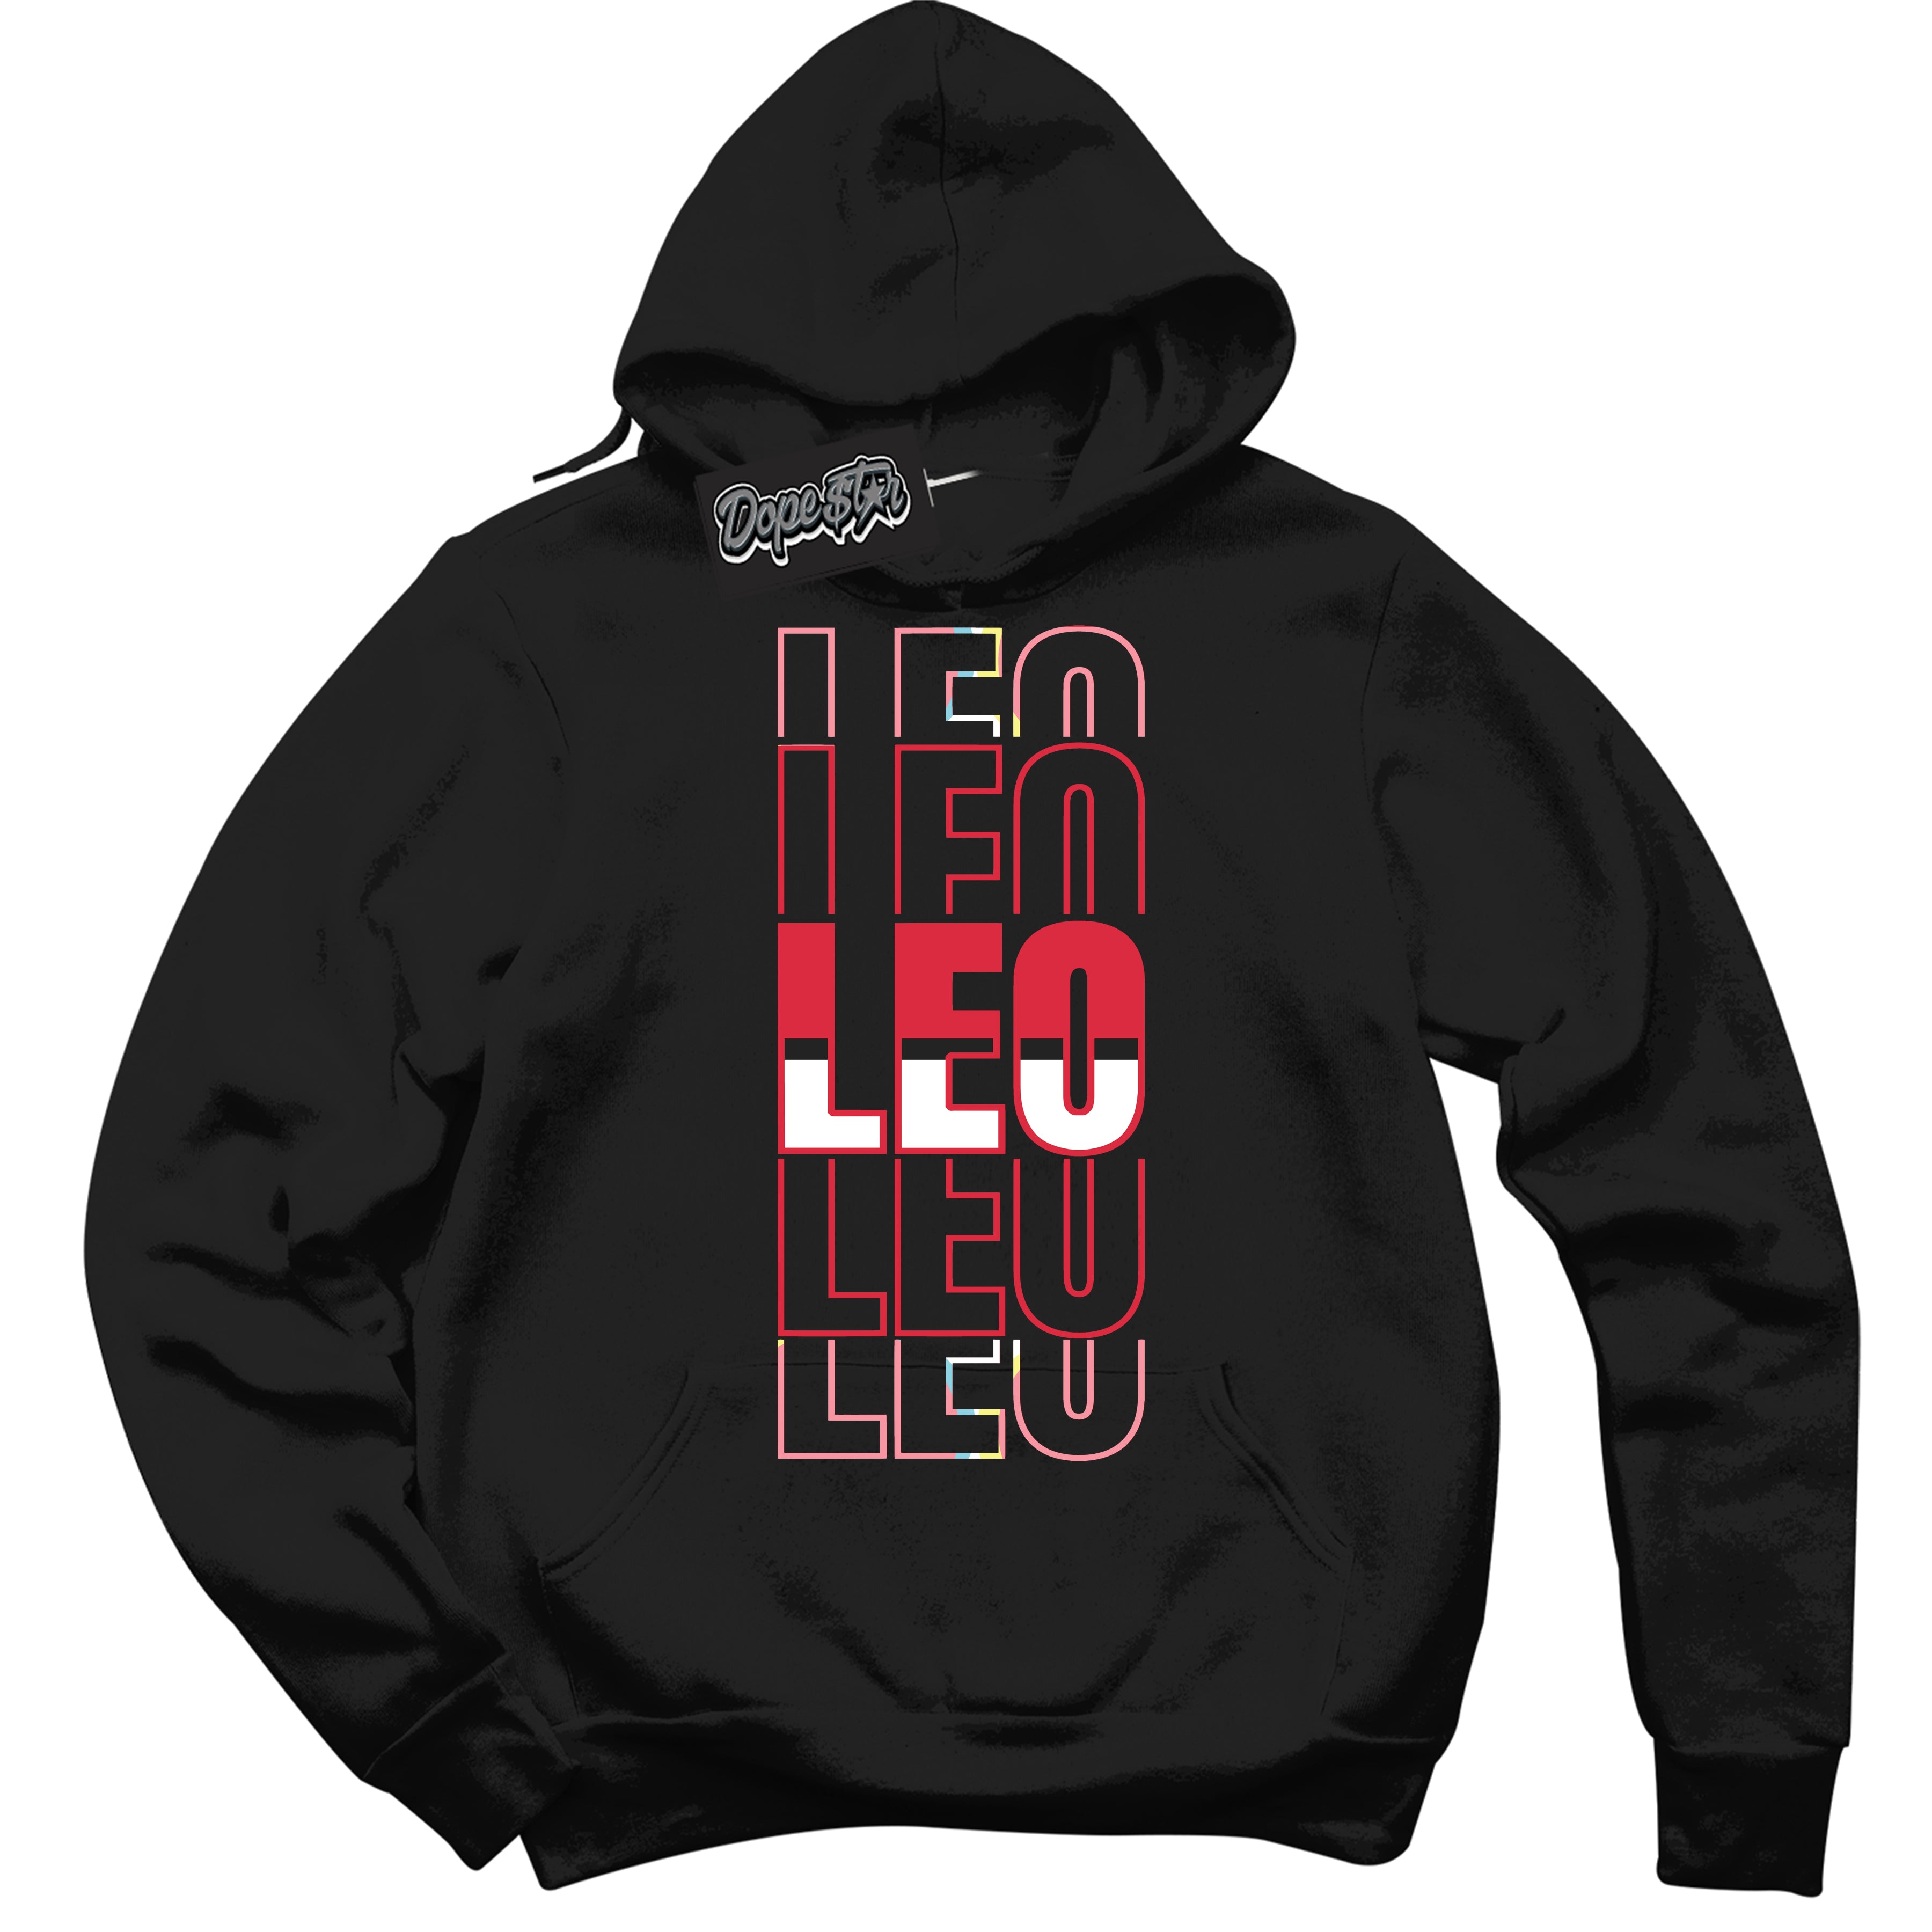 Cool Black Graphic DopeStar Hoodie with “ Leo “ print, that perfectly matches Spider-Verse 1s sneakers